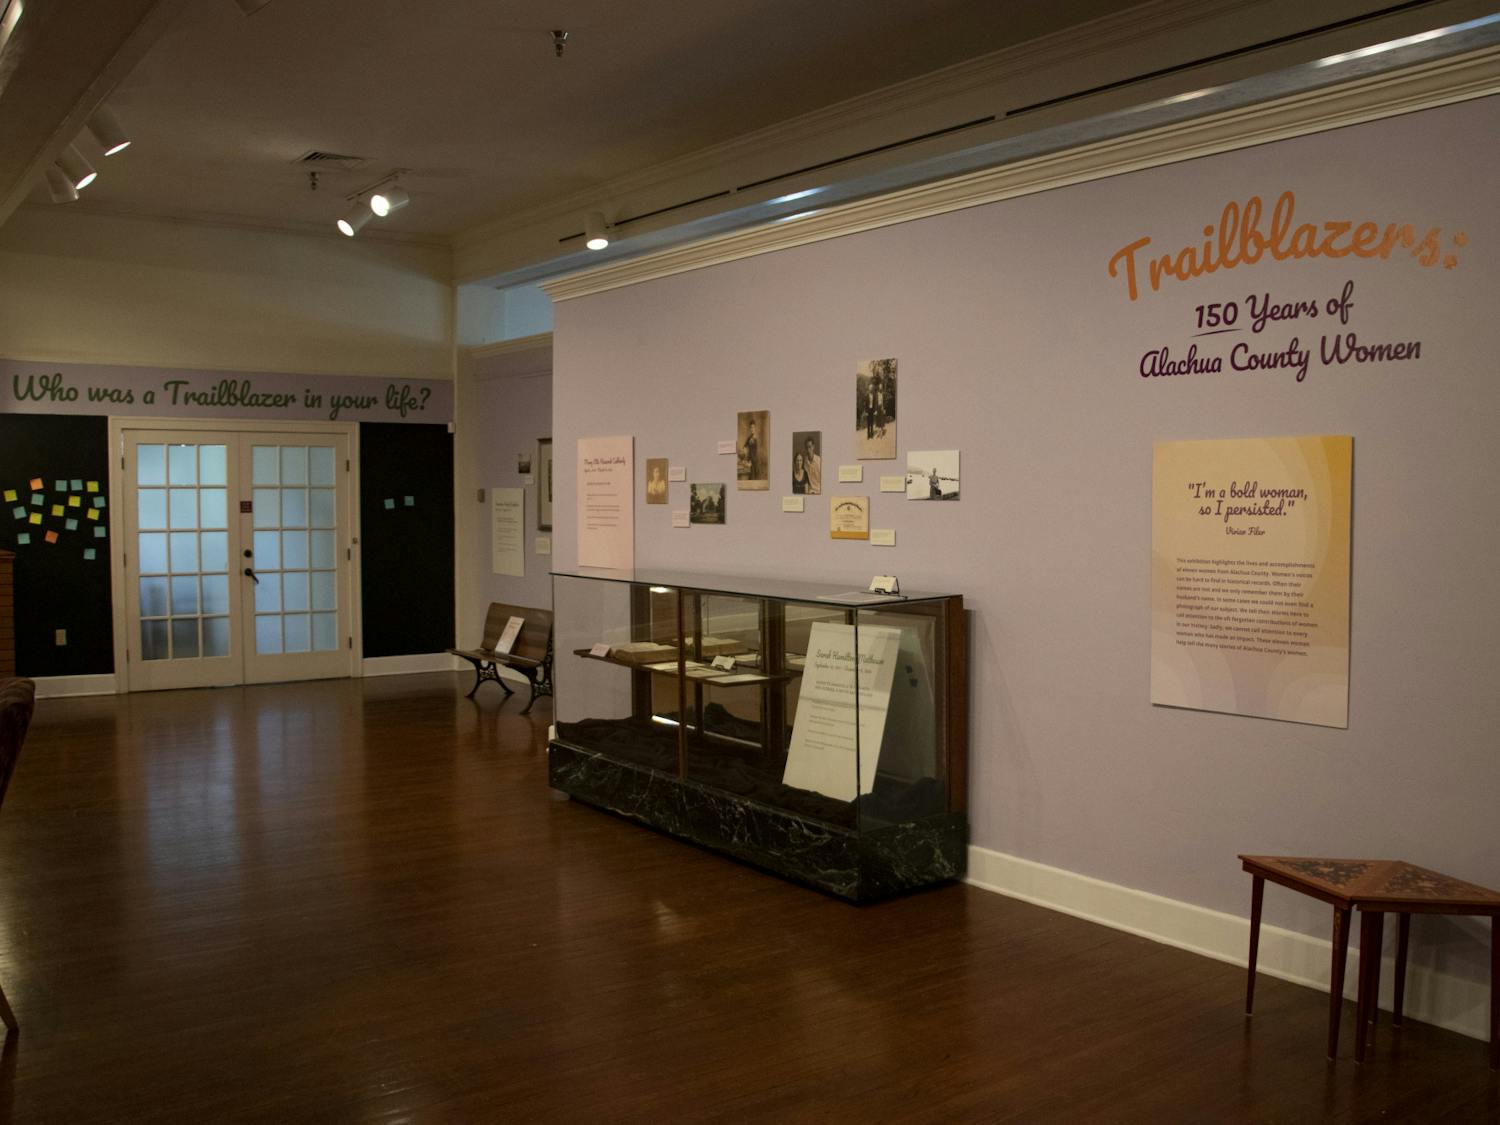 The current exhibit at Matheson History Museum, Trailblazers: 150 Years of Alachua County Women, is seen on Wednesday, Sept. 1, 2021. The exhibit was originally supposed to open on March 24, 2020, but the museum closed due to COVID-19 on March 17, 2020. The exhibit opened in April of this year instead.